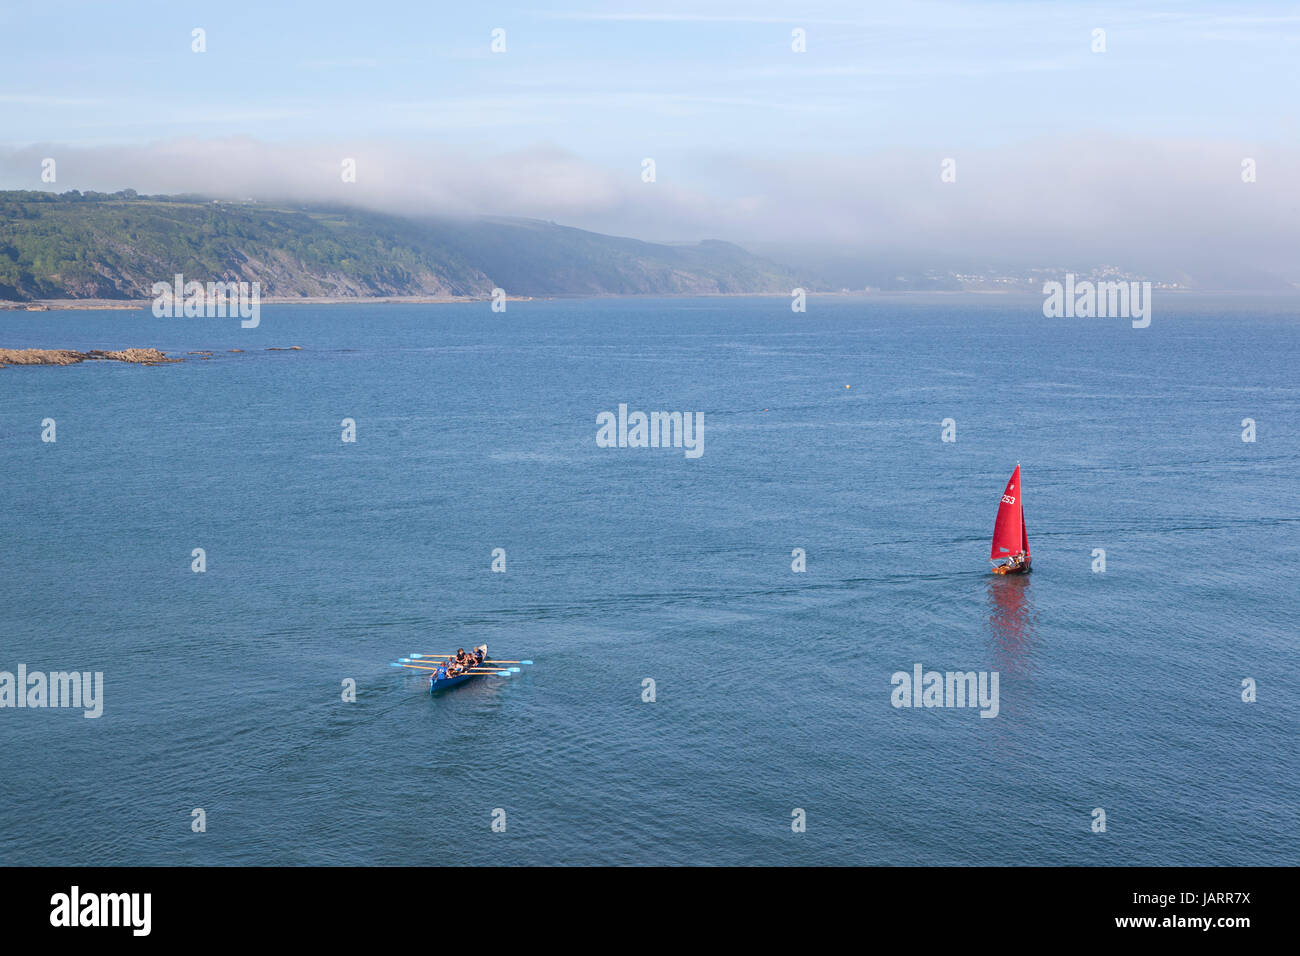 Sea mist rolls in to the coast at Looe, Cornwall as a red sailed dinghy and a pilot gig make their way out to sea. Stock Photo